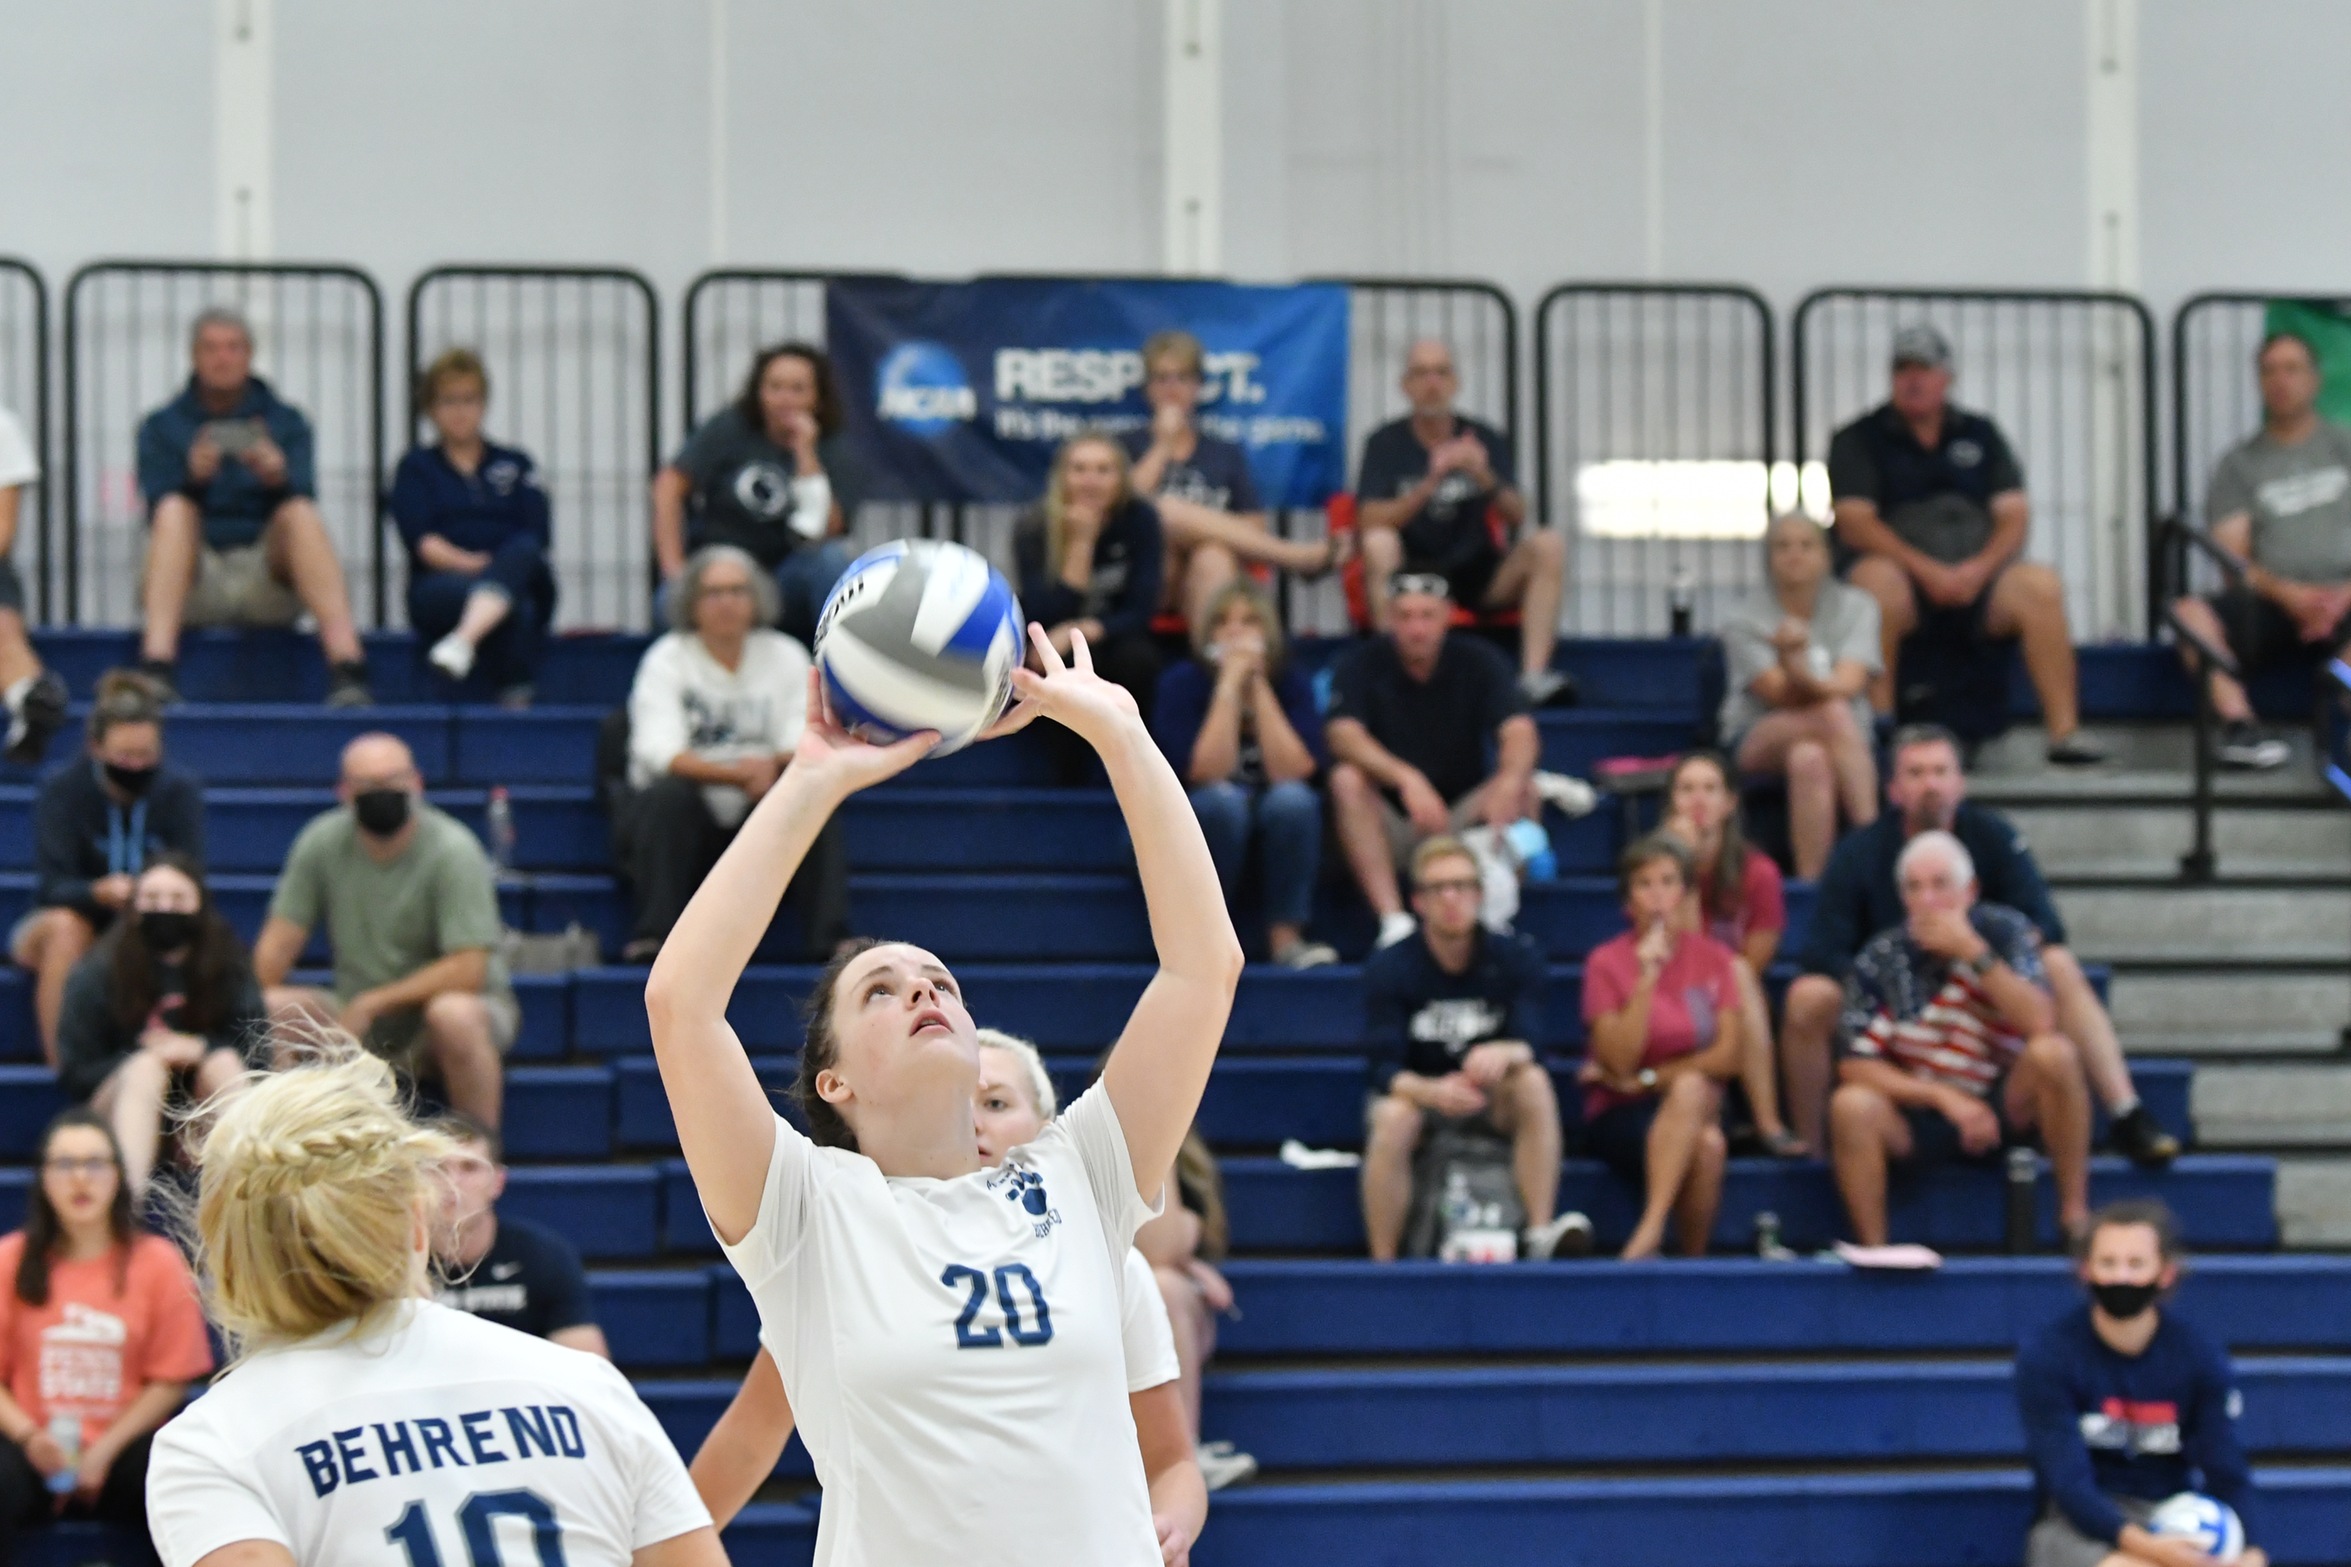 Behrend Volleyball Finishes Day Two of PSB Invitational; Reiland Named All-Tournament Team